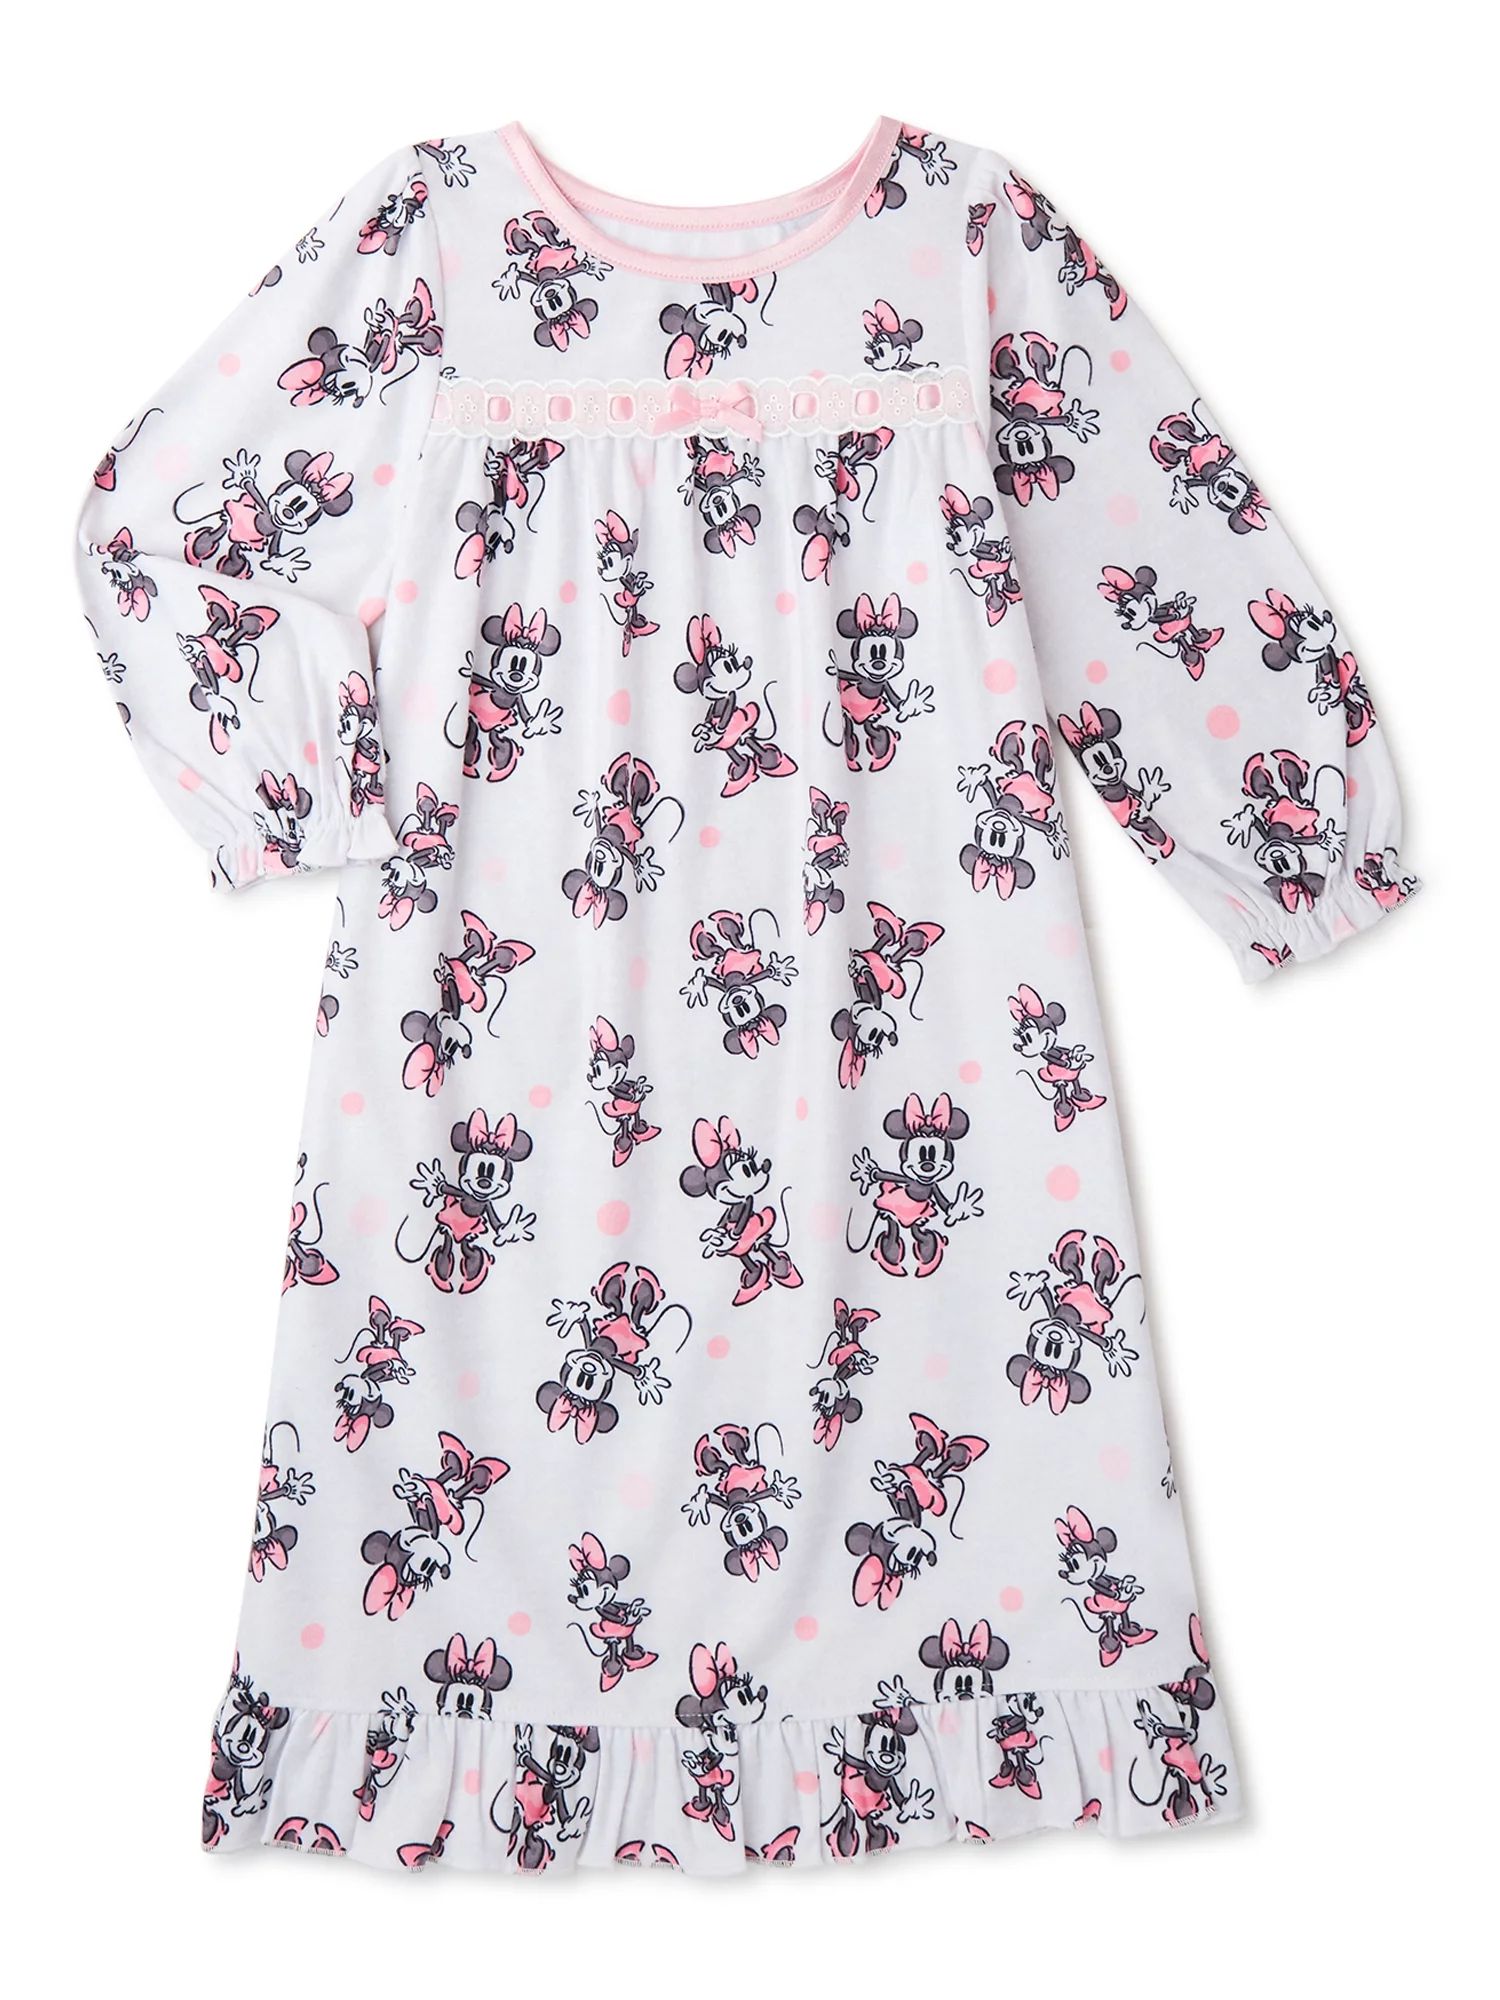 Minnie Mouse Toddler Girls Pajama Nightgown, Sizes 2T-5T | Walmart (US)